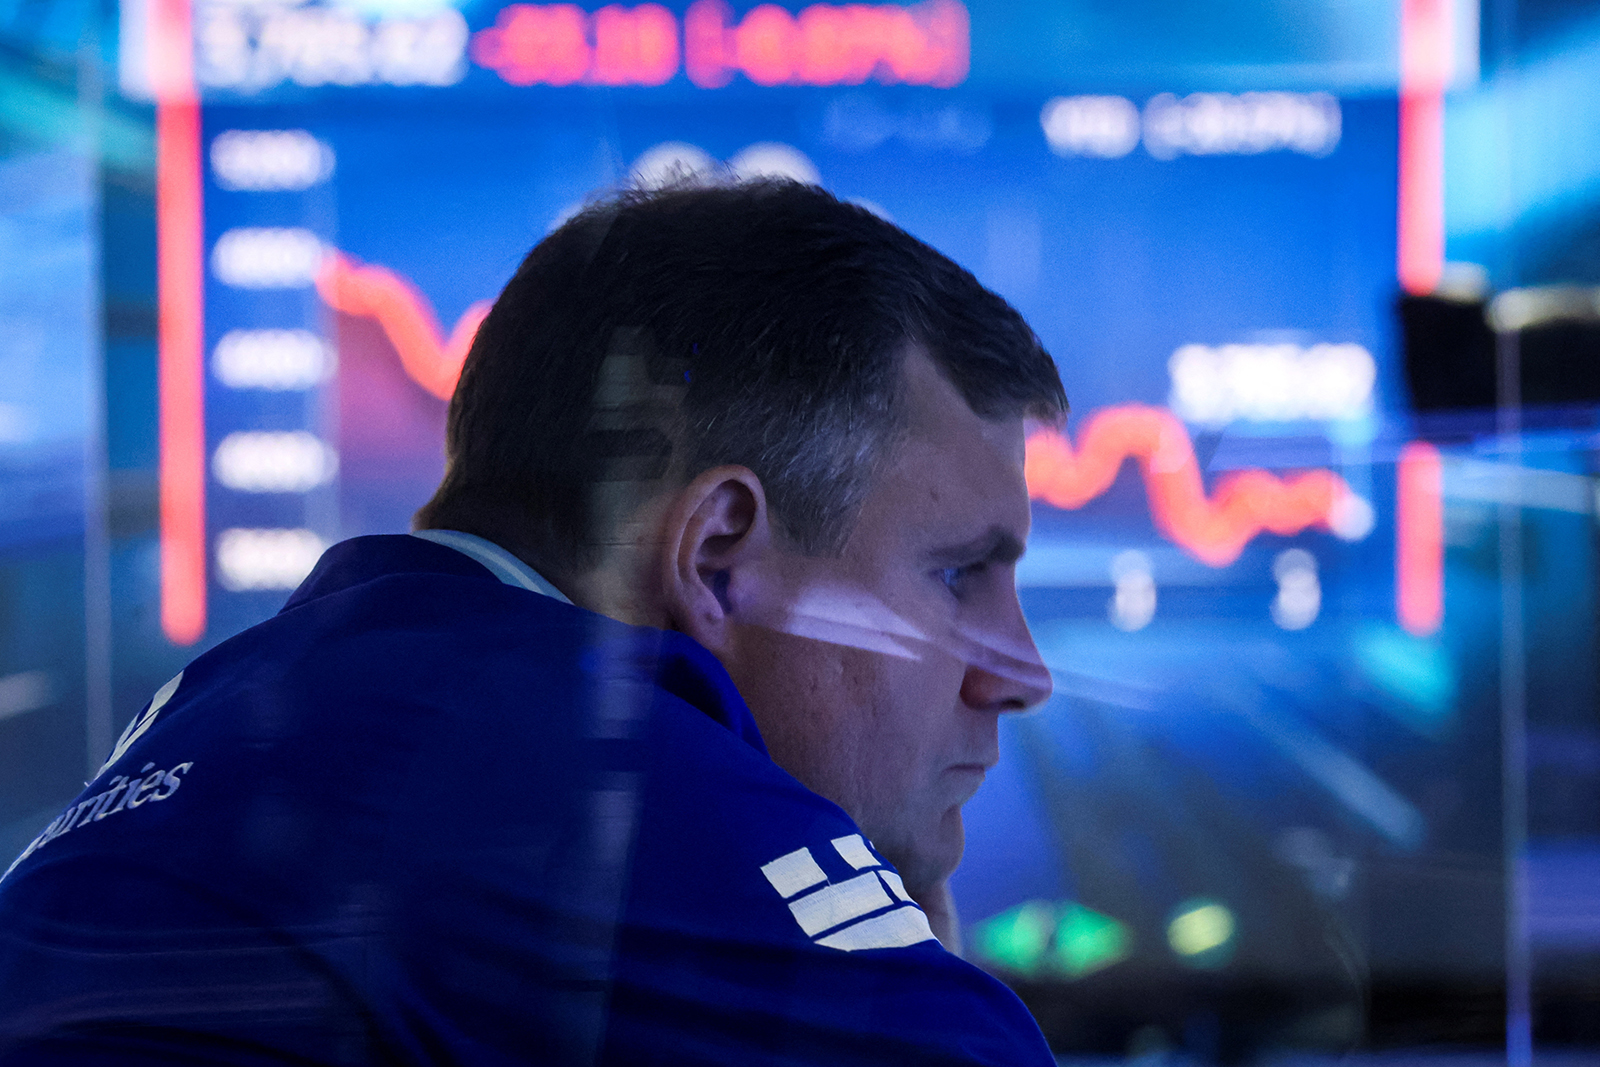 A trader works on the floor of the New York Stock Exchange in New York City on July 13.